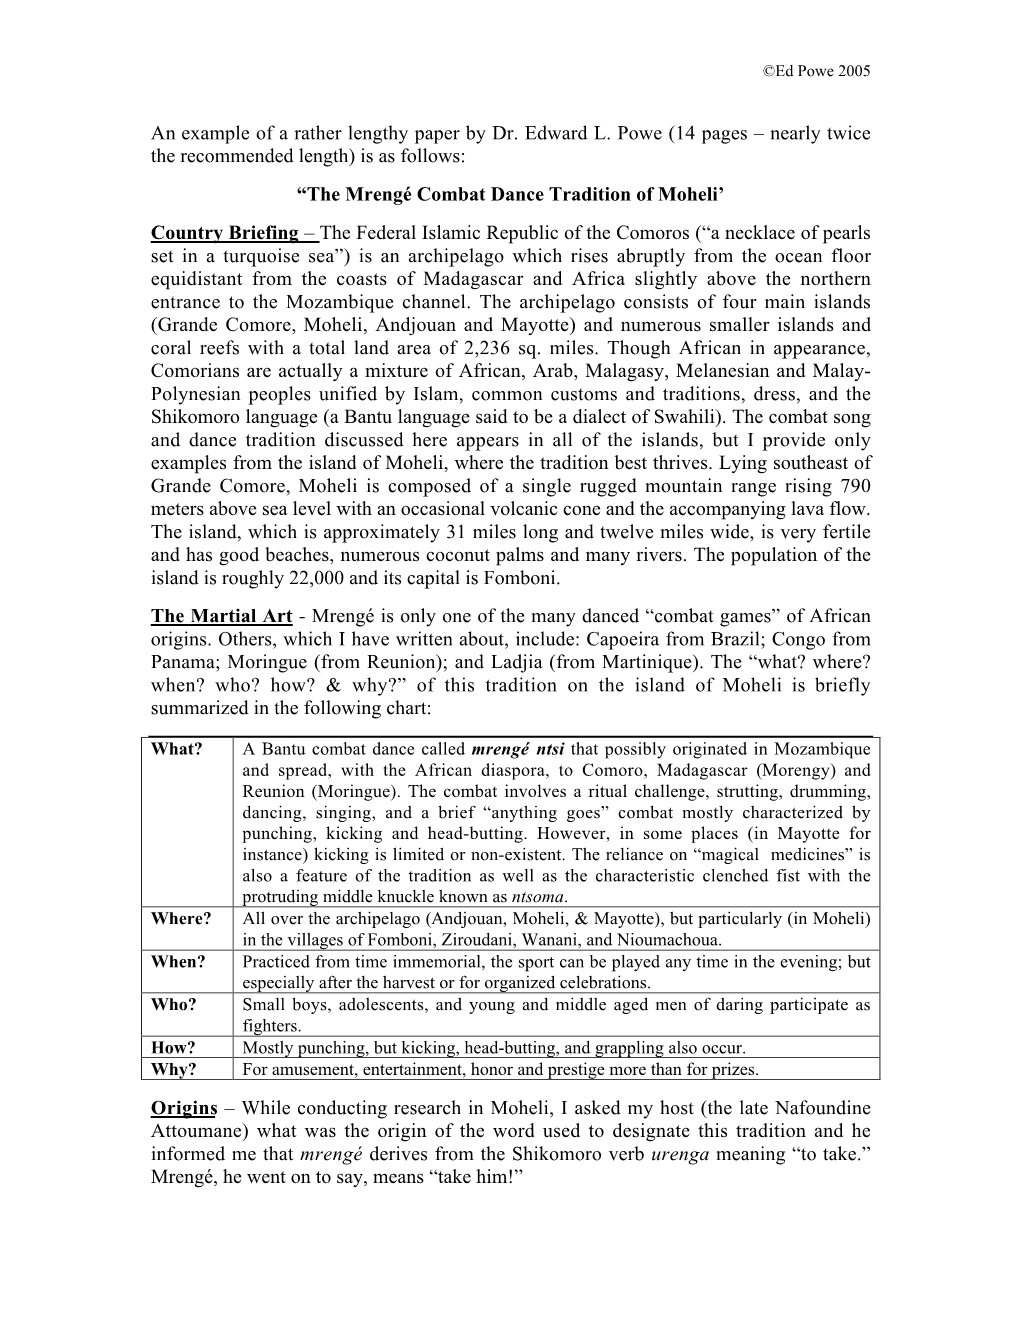 An Example of a Rather Lengthy Paper by Dr. Edward L